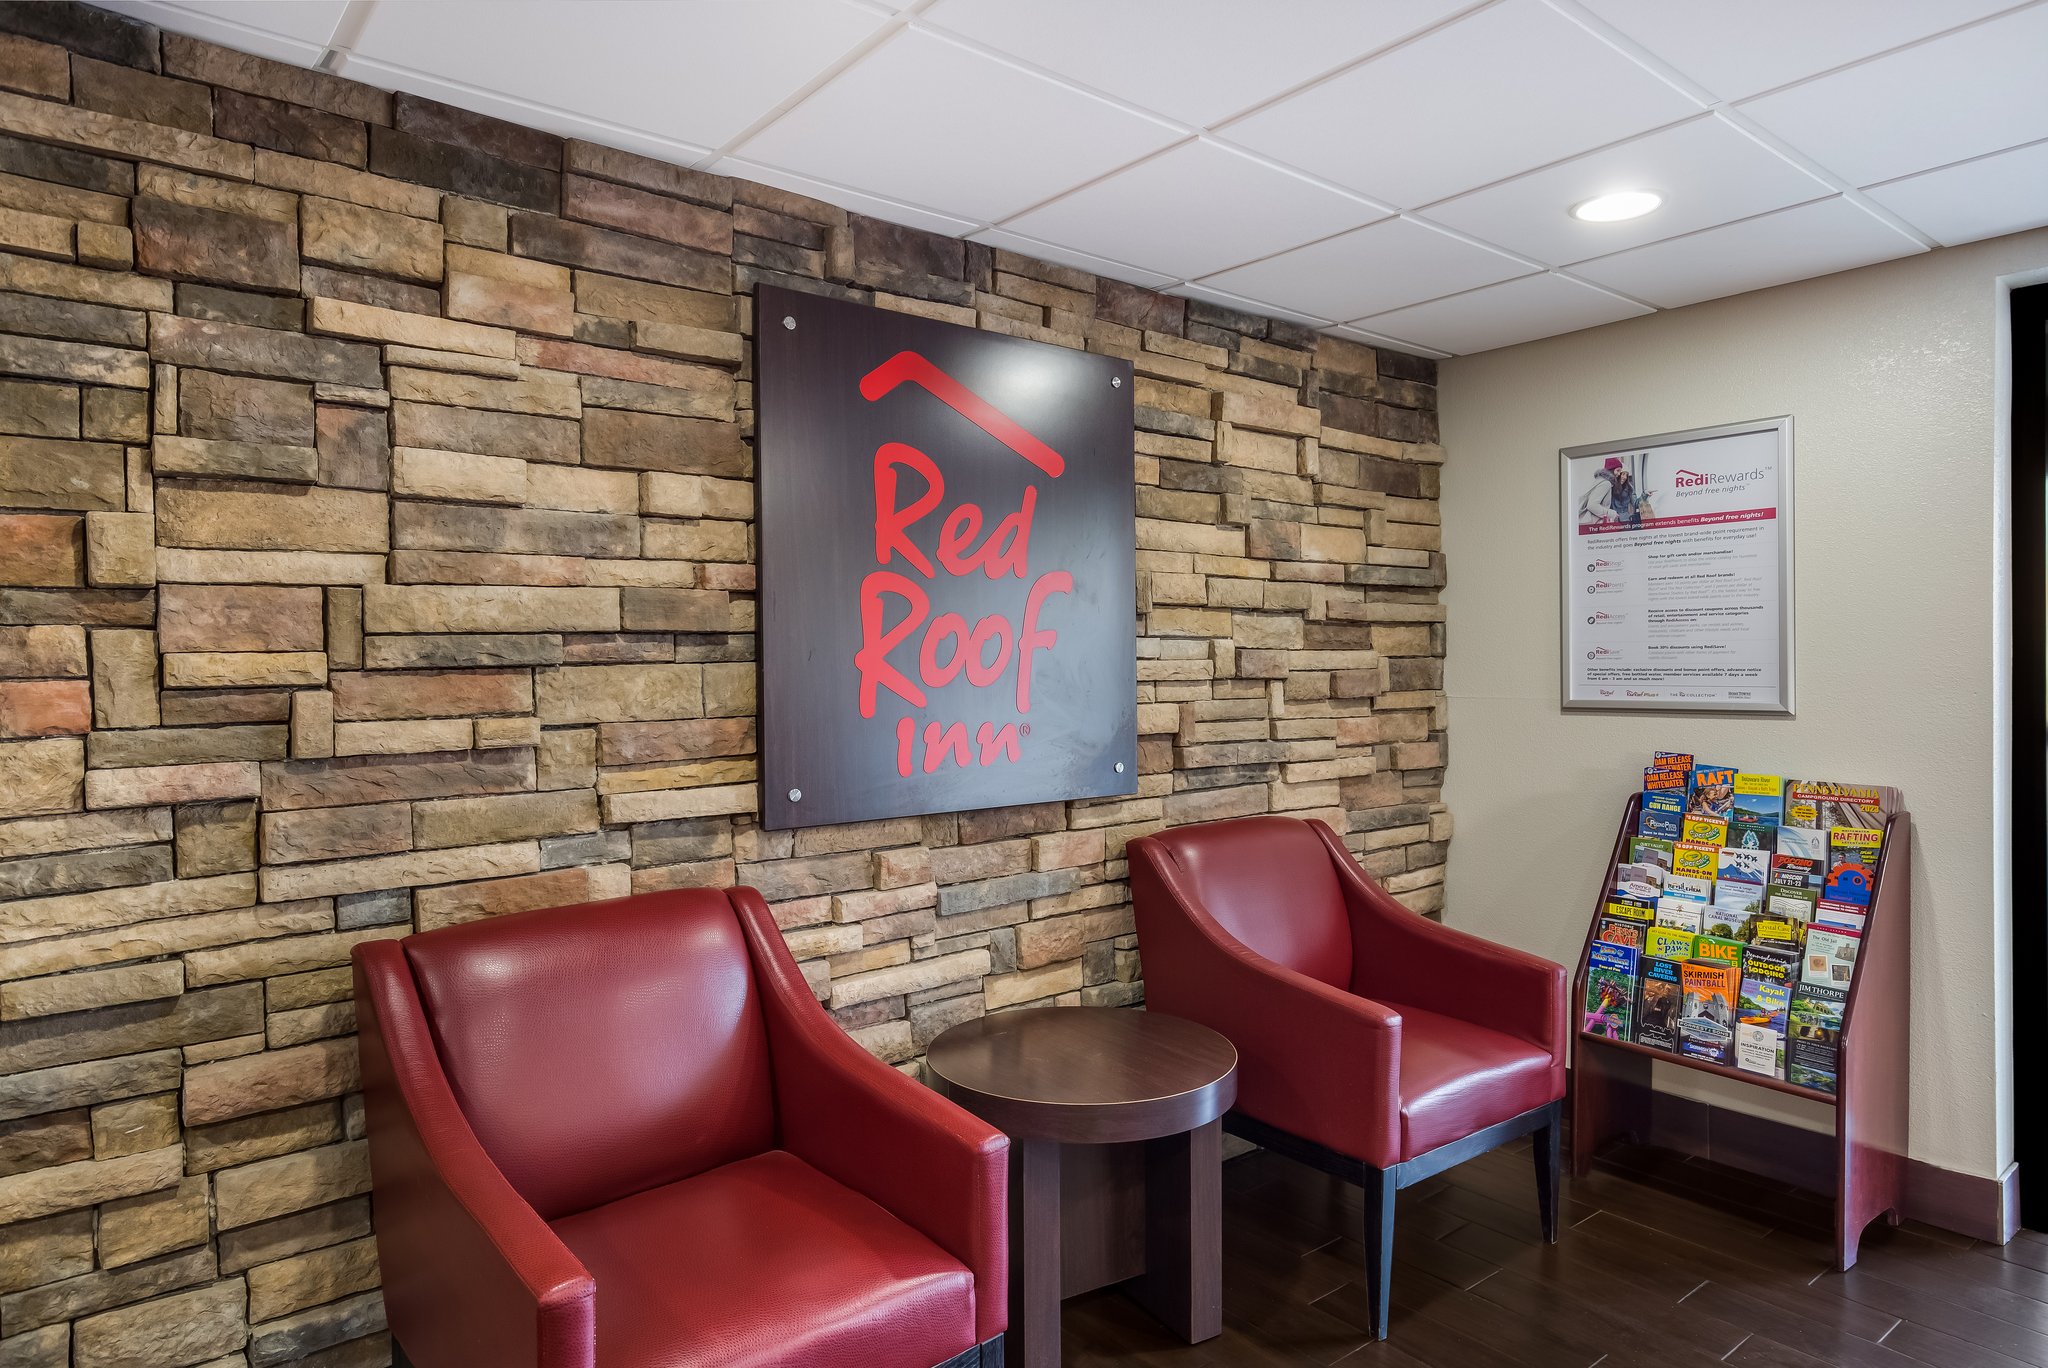 Red Roof Inn Allentown South